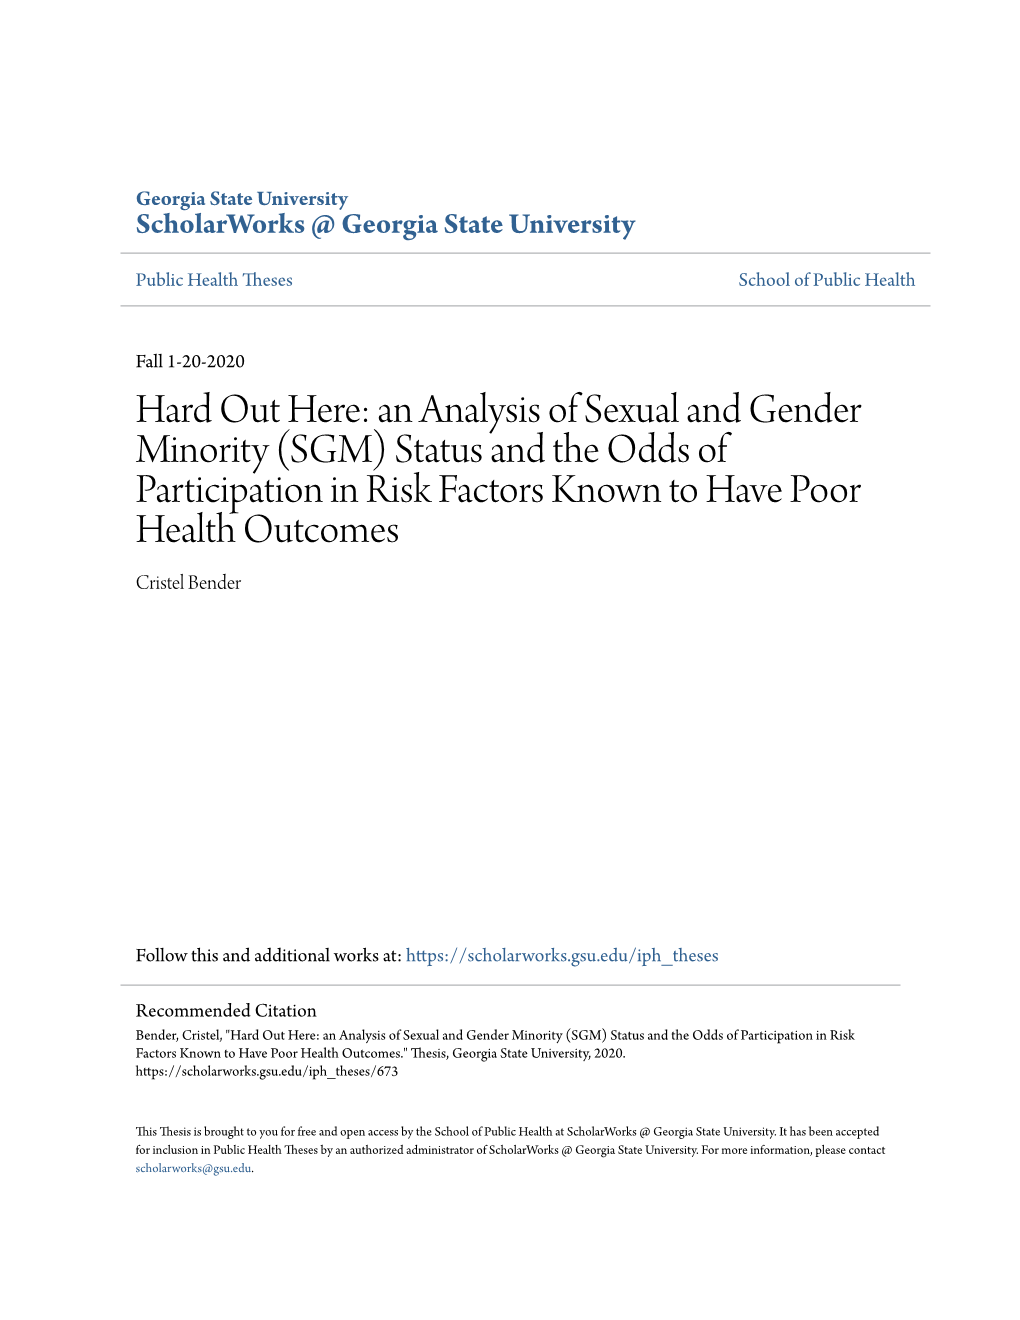 Hard out Here: an Analysis of Sexual and Gender Minority (SGM) Status and the Odds of Participation in Risk Factors Known to Have Poor Health Outcomes Cristel Bender